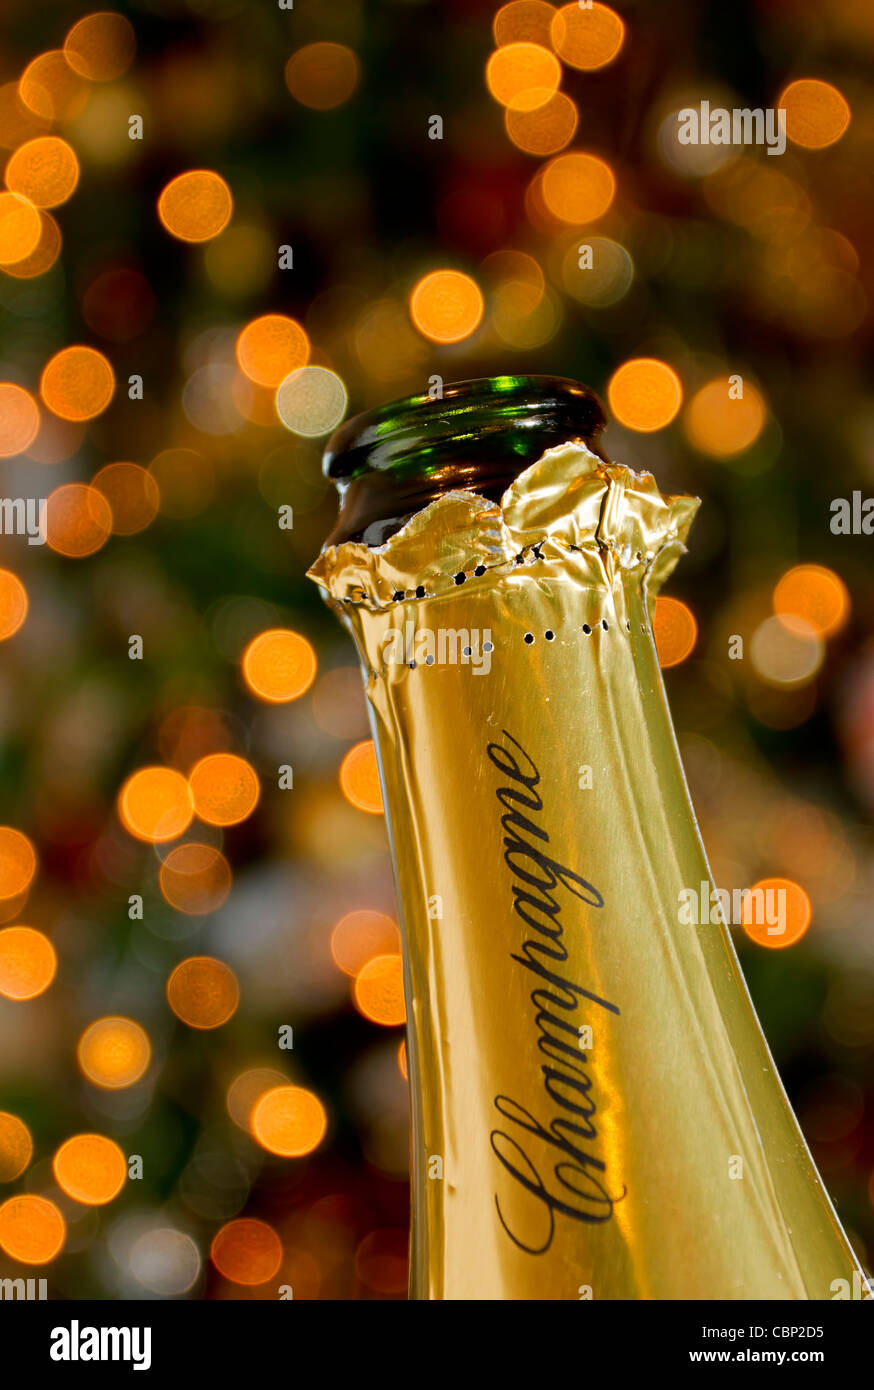 Champagne bottle on christmas sparkly background Stock Photo